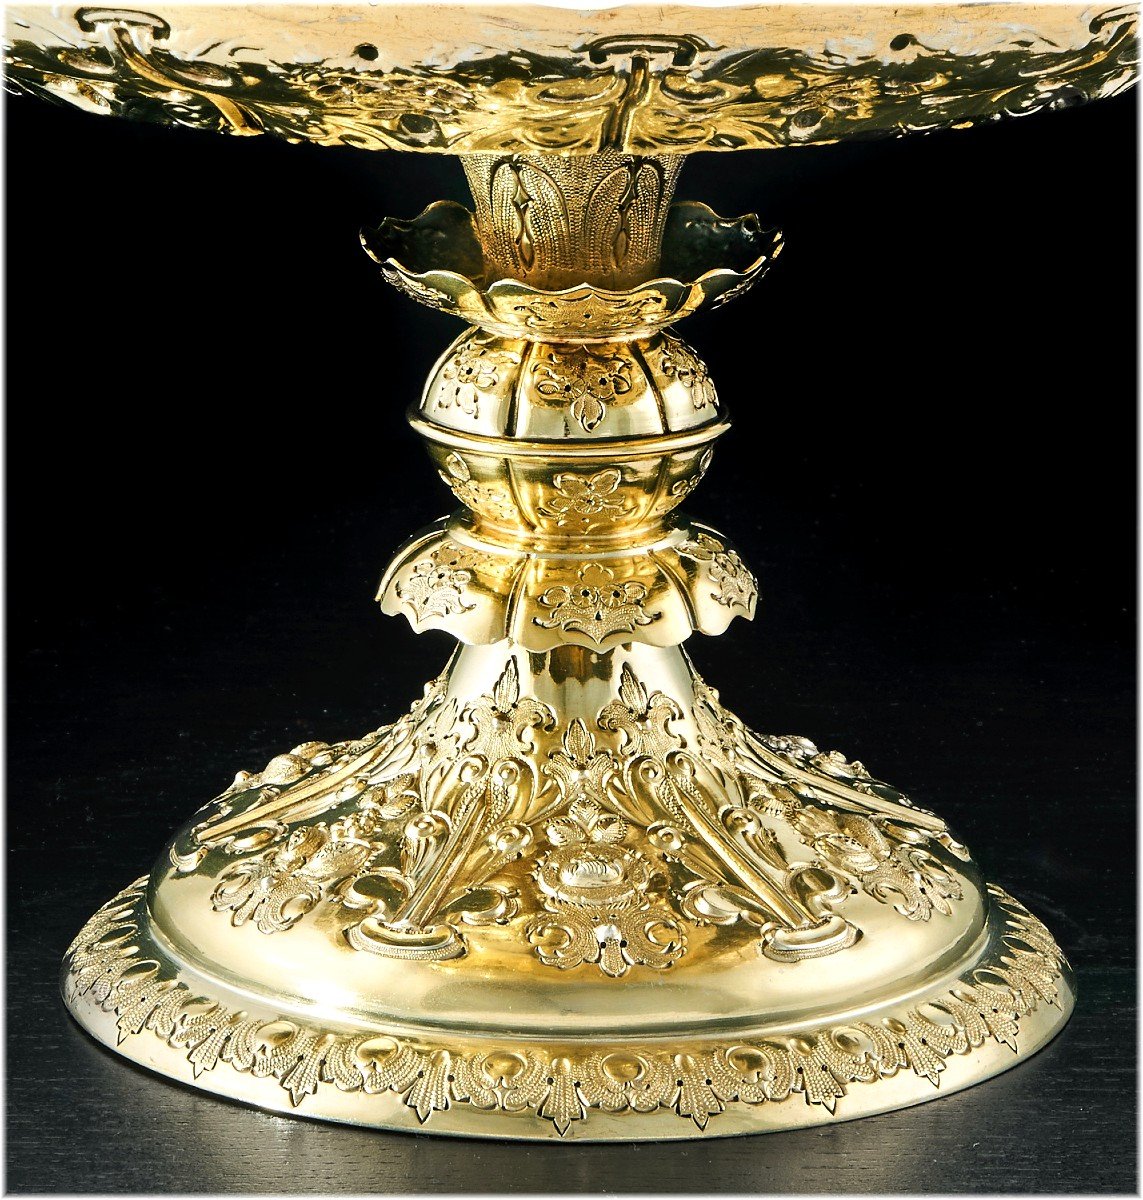 Martin Hall : Gilt Sterling Silver Tazza / Centerpiece Dish London 1883 - Flowers, Fruits-photo-4